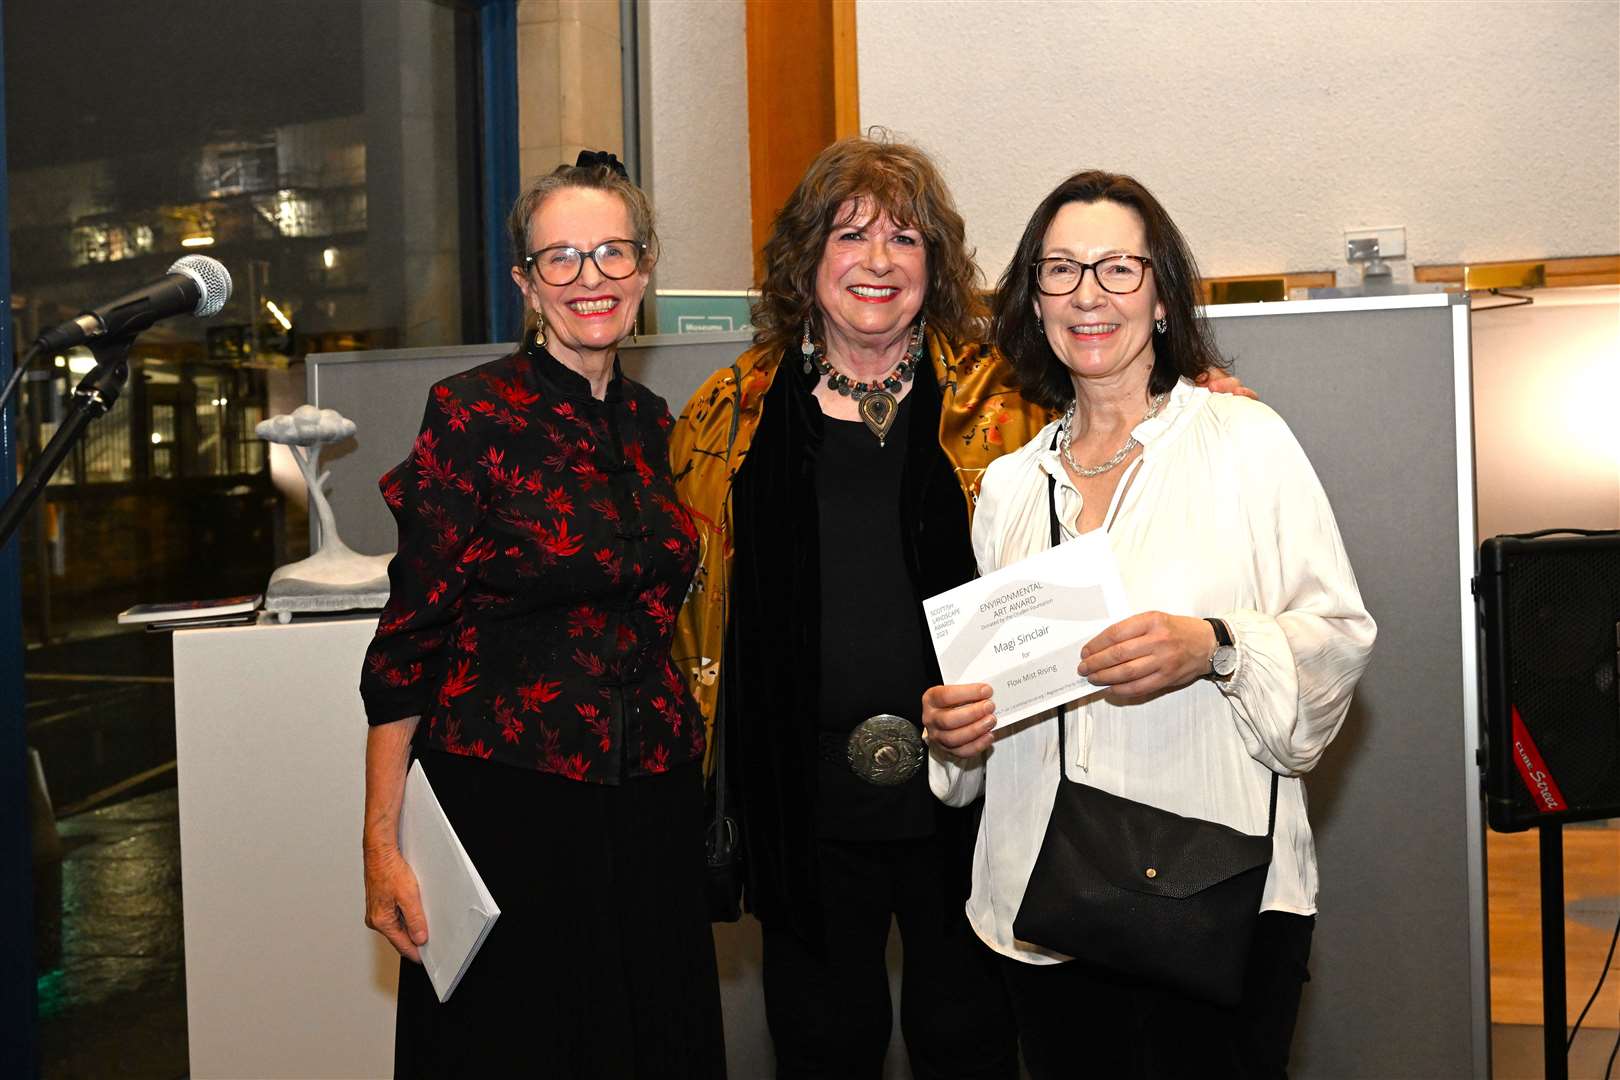 Scottish Landscape Awards (Scottish Arts Trust) winners are announced at the inaugural exhibition in the City Art Centre in Edinburgh with Lybster artist Magi Sinclair receiving a major accolade for her landscape work. From left, Sara Cameron McBean from Scottish Arts Trust, Barbara Rae chair of judges and artist Magi Sinclair. Picture: Greg Macvean